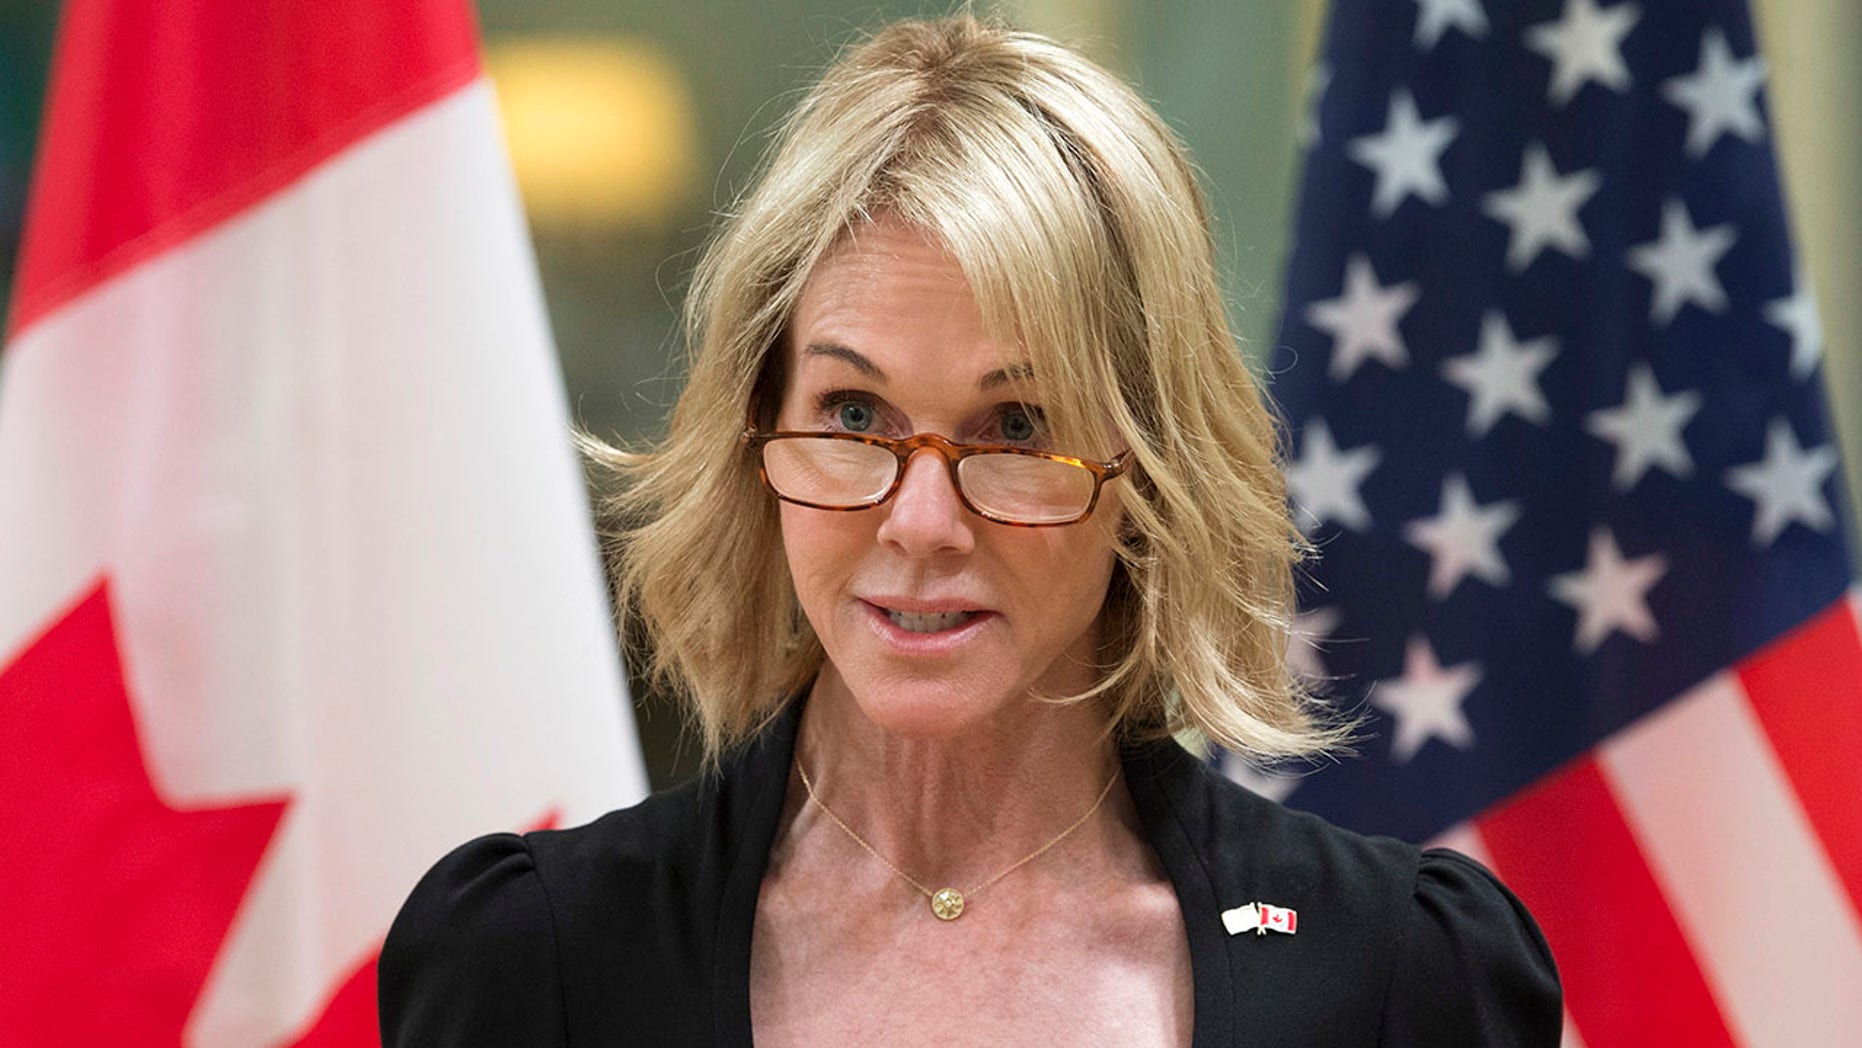 DOSSIER - In this October 23, 2017 photo, the US Ambassador to Canada, Kelly Knight Craft, will speak after presenting his credentials at a ceremony at Rideau Hall. Ottawa.